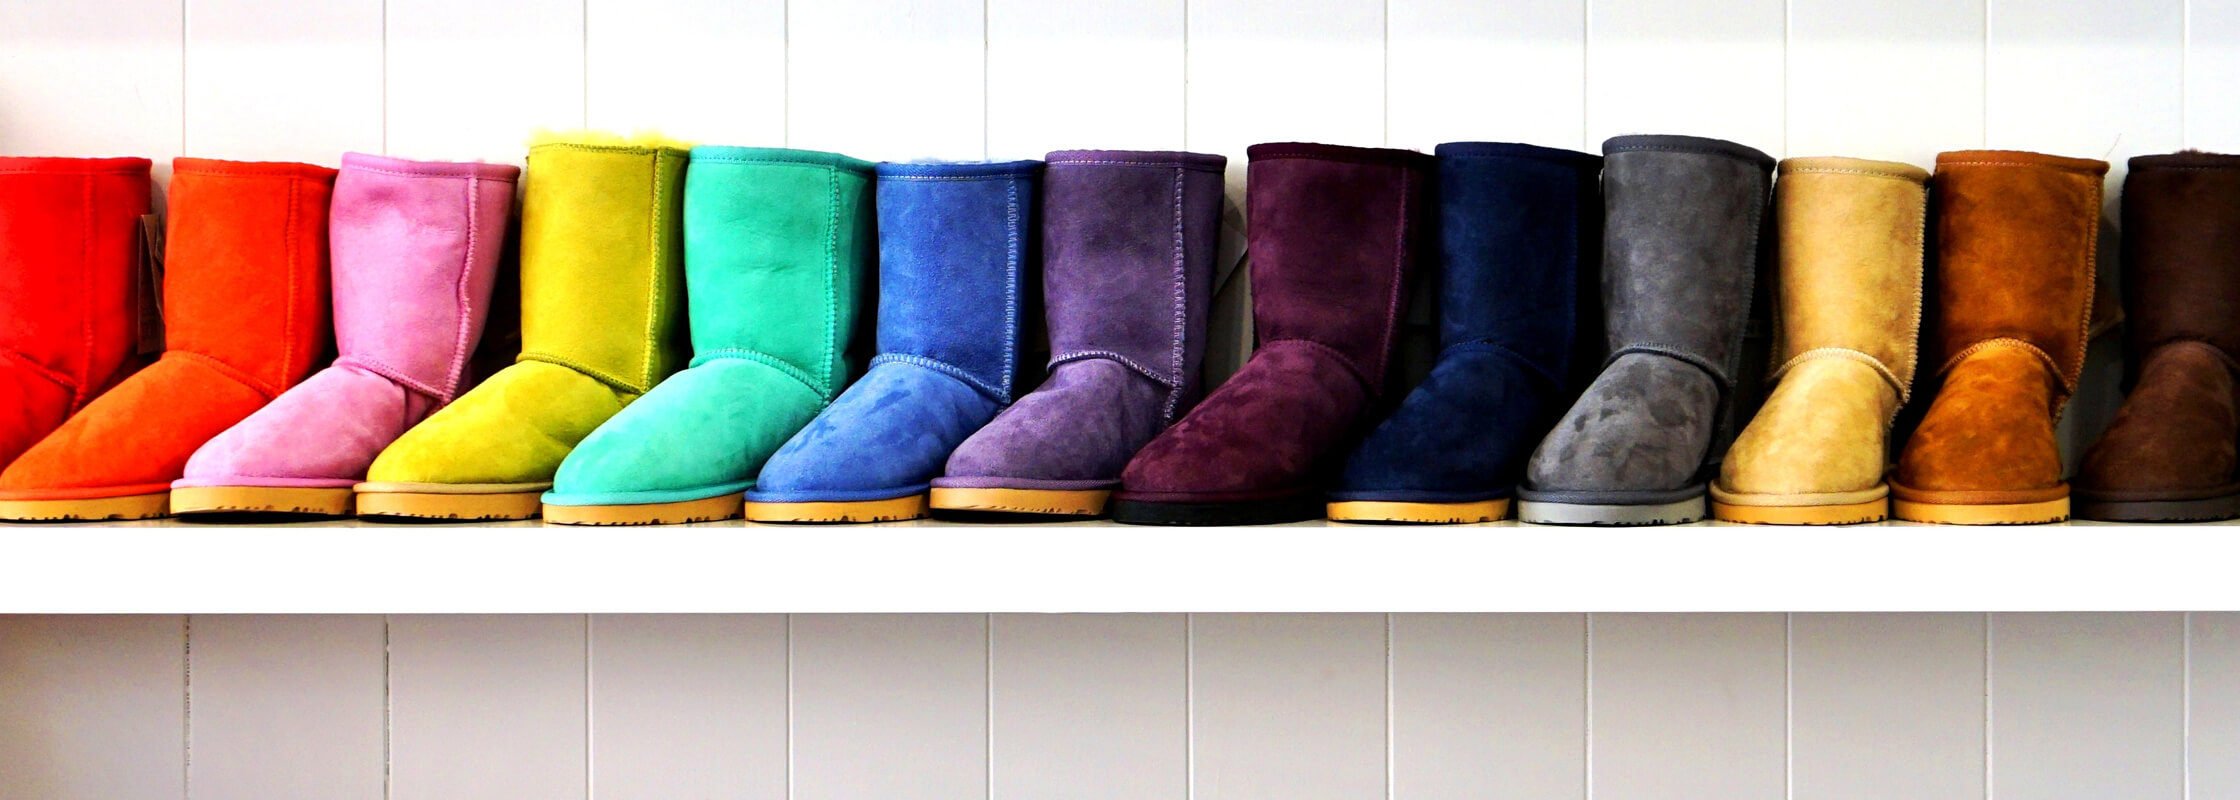 How To Clean & Care For Sheepskin Boots  Shoe Care  Collonil EN